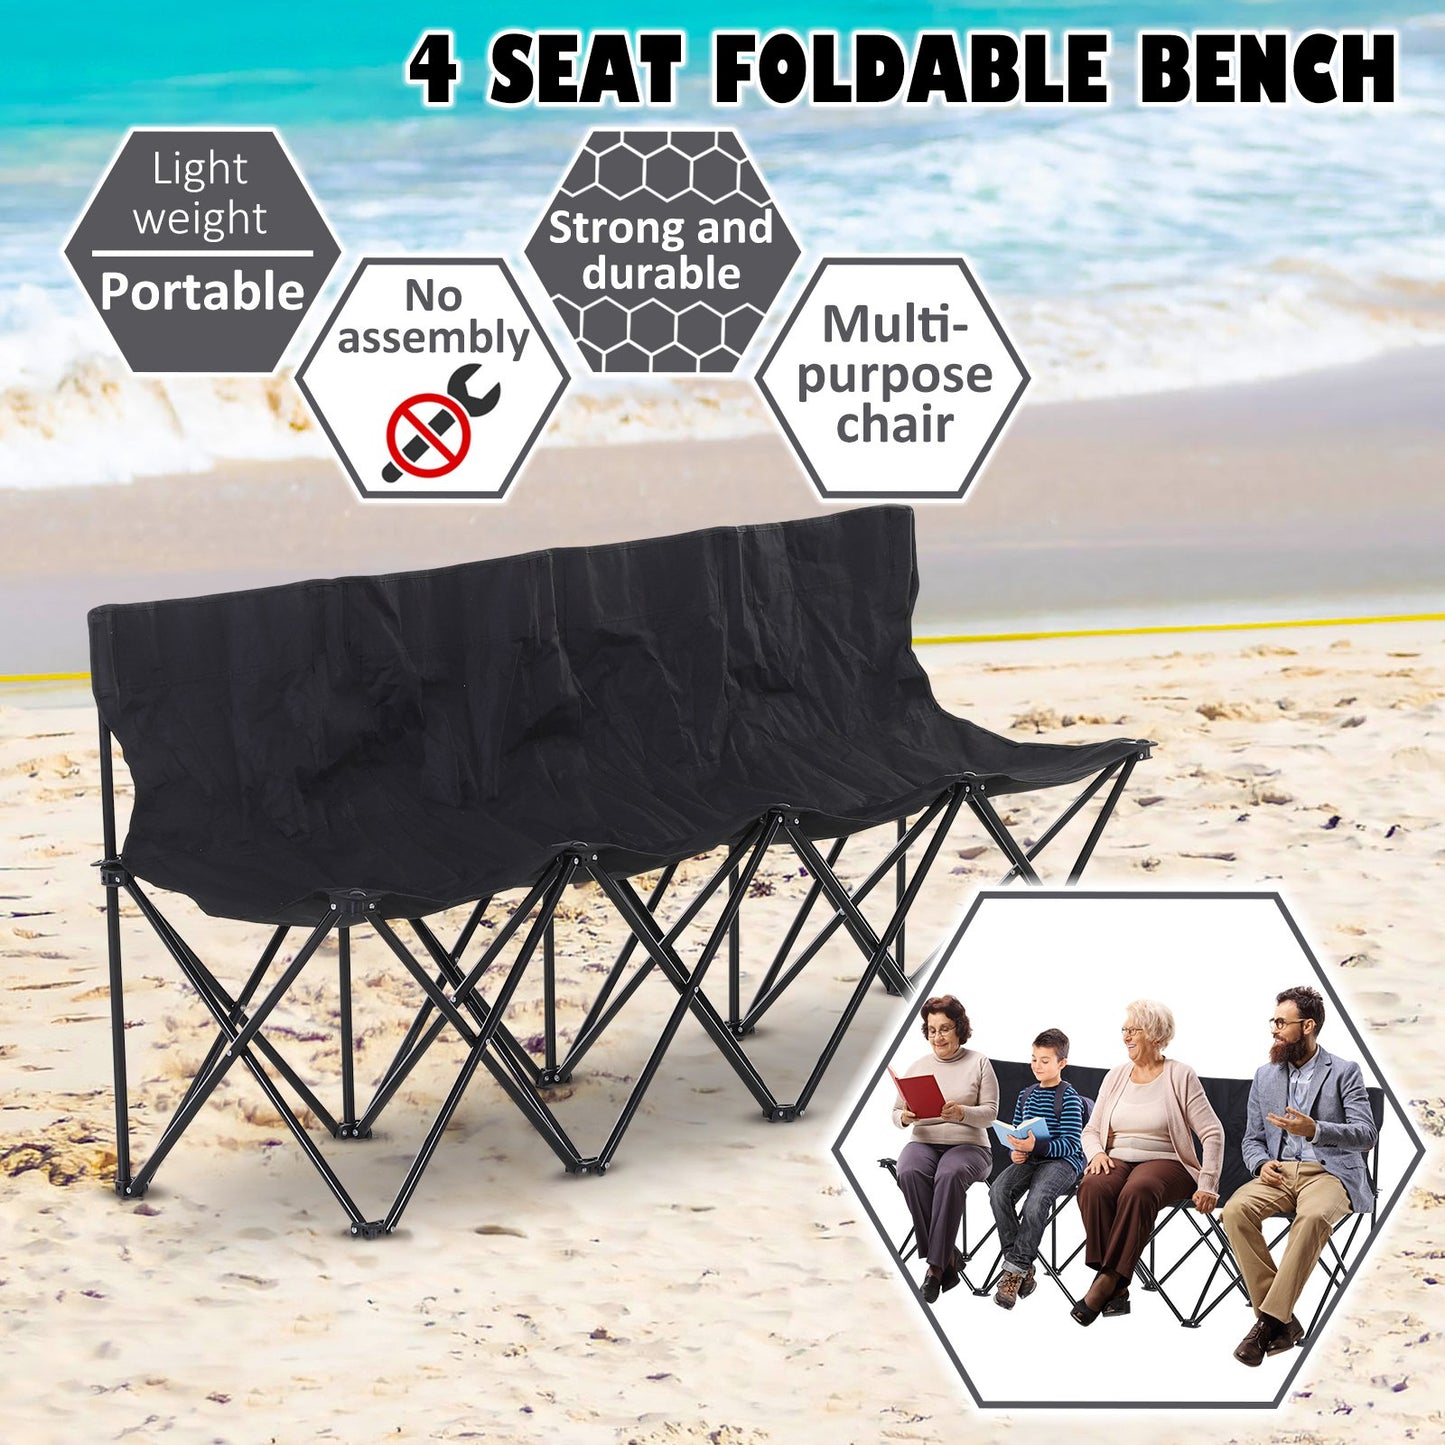 Outsunny 4 Seat Sport Bench Camp Seat Folding Portable Team Bench with Carrying Bag - Black